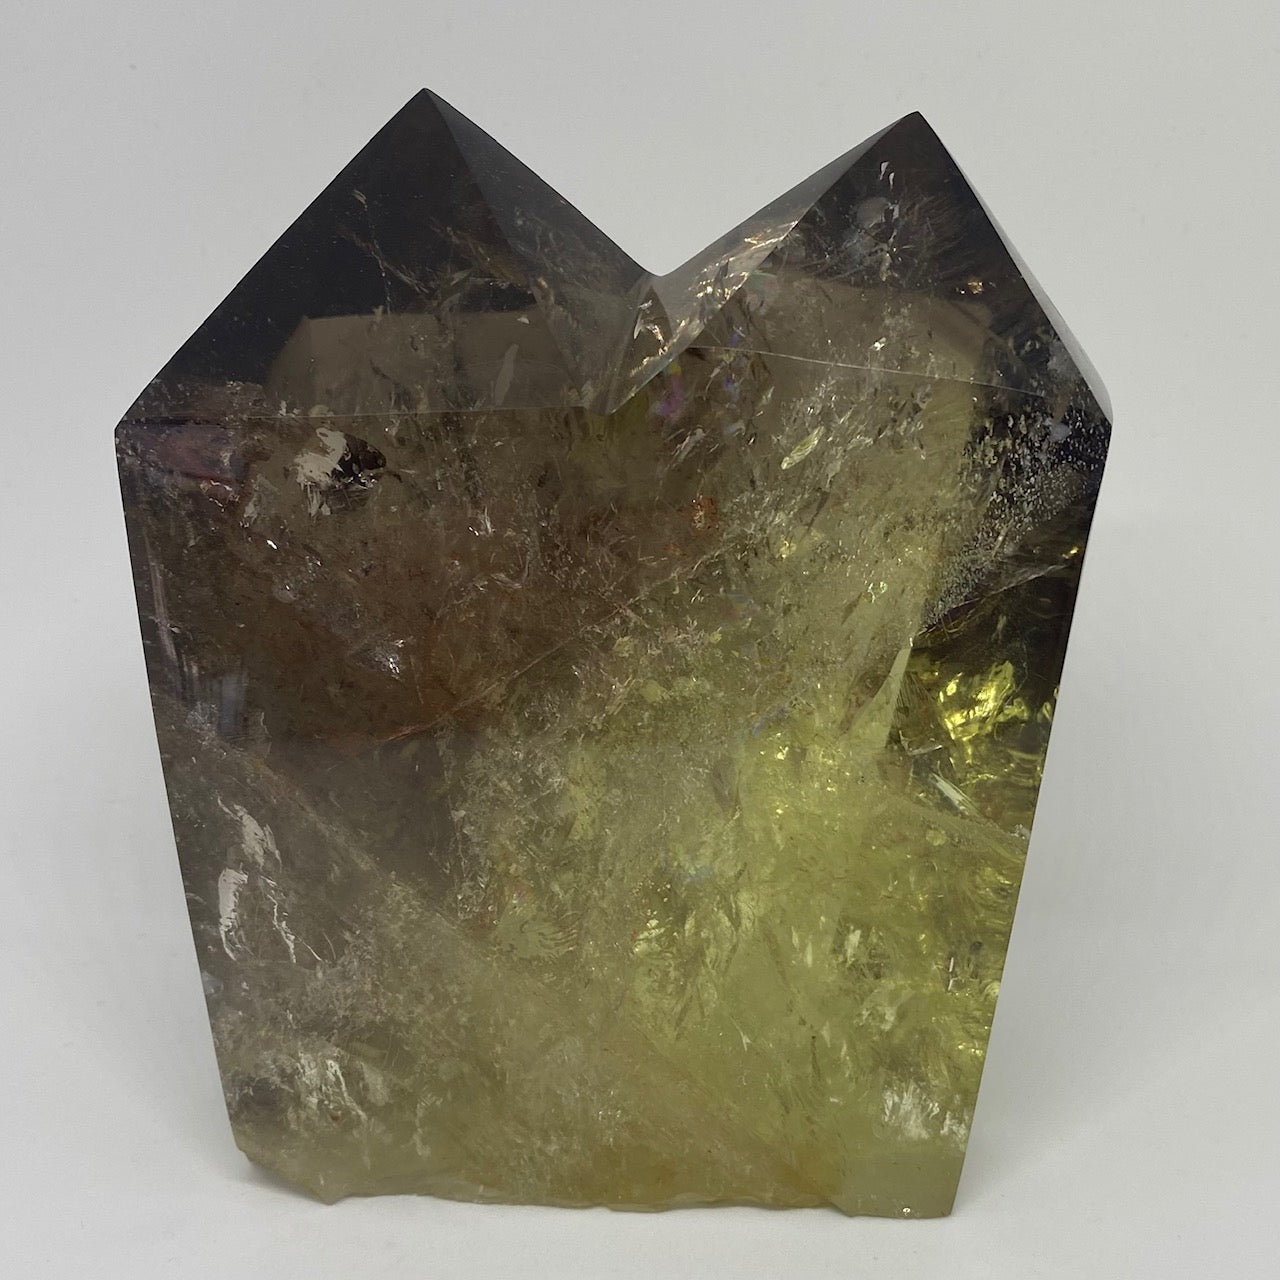 Smoky Citrine Quartz Healing CrystaL - Double Point Large Tower - 1.66kg